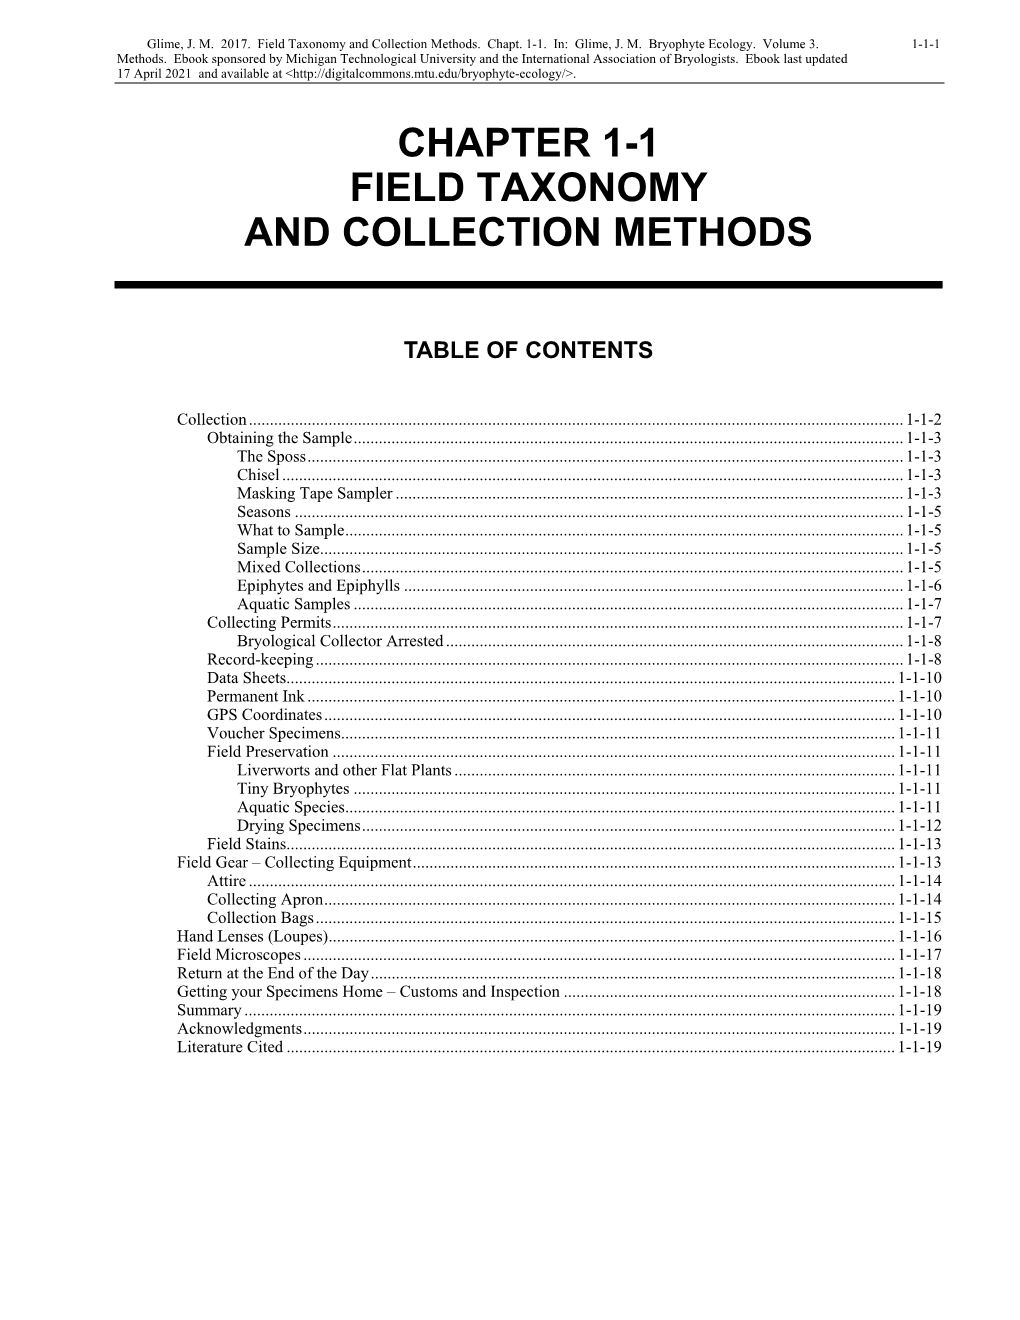 Chapter 1-1 Field Taxonomy and Collection Methods